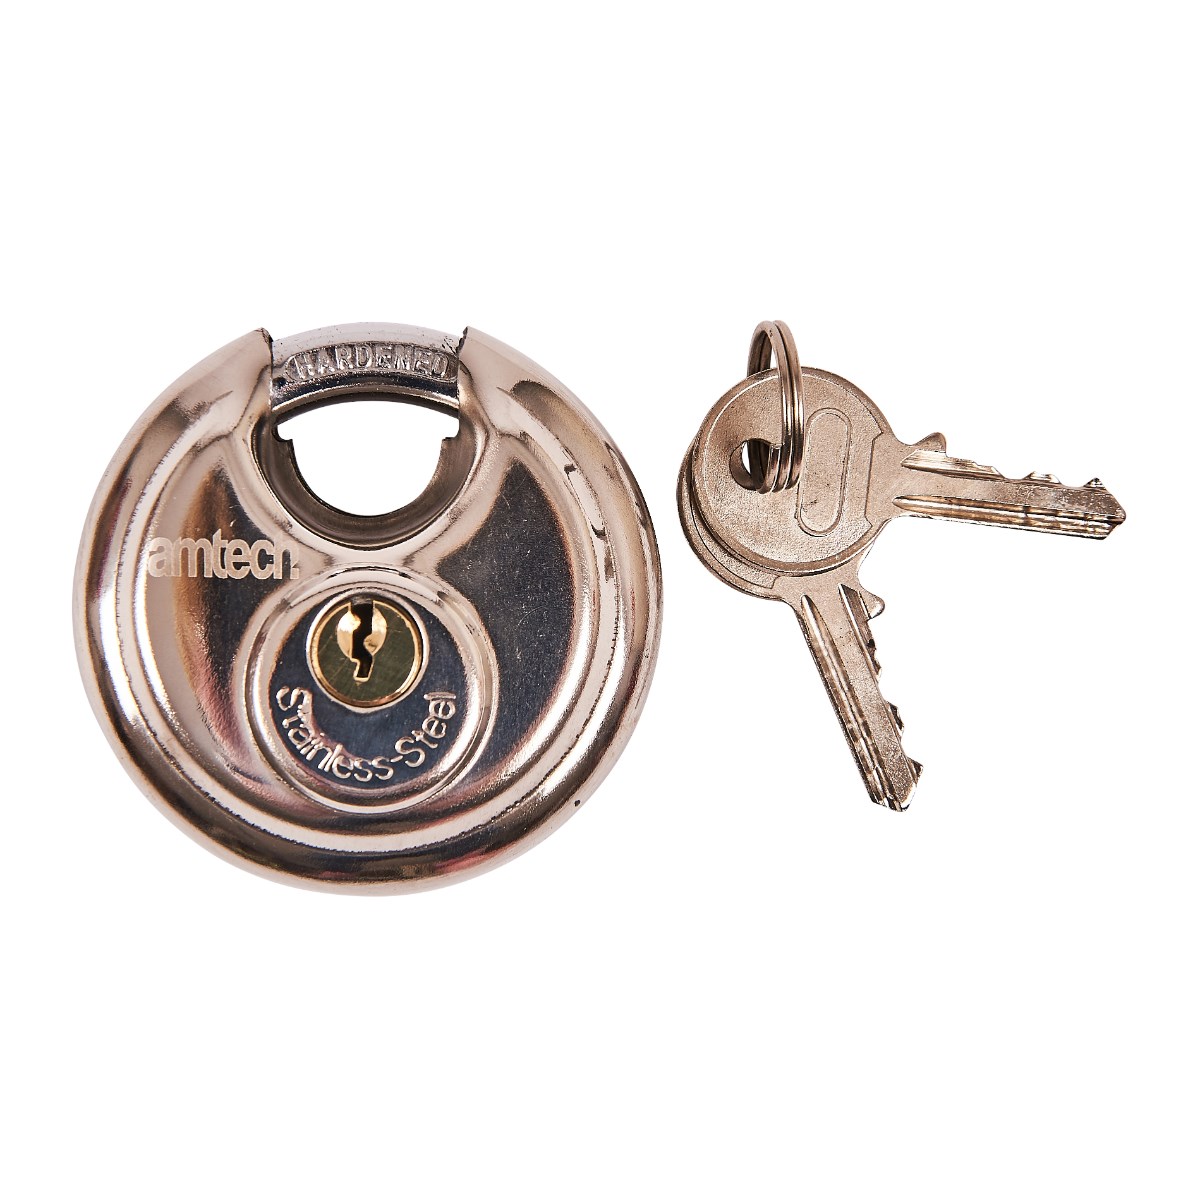 New 70Mm Disc Padlock Heavy Duty Construction Stainless Steel Shell With 2 Keys 